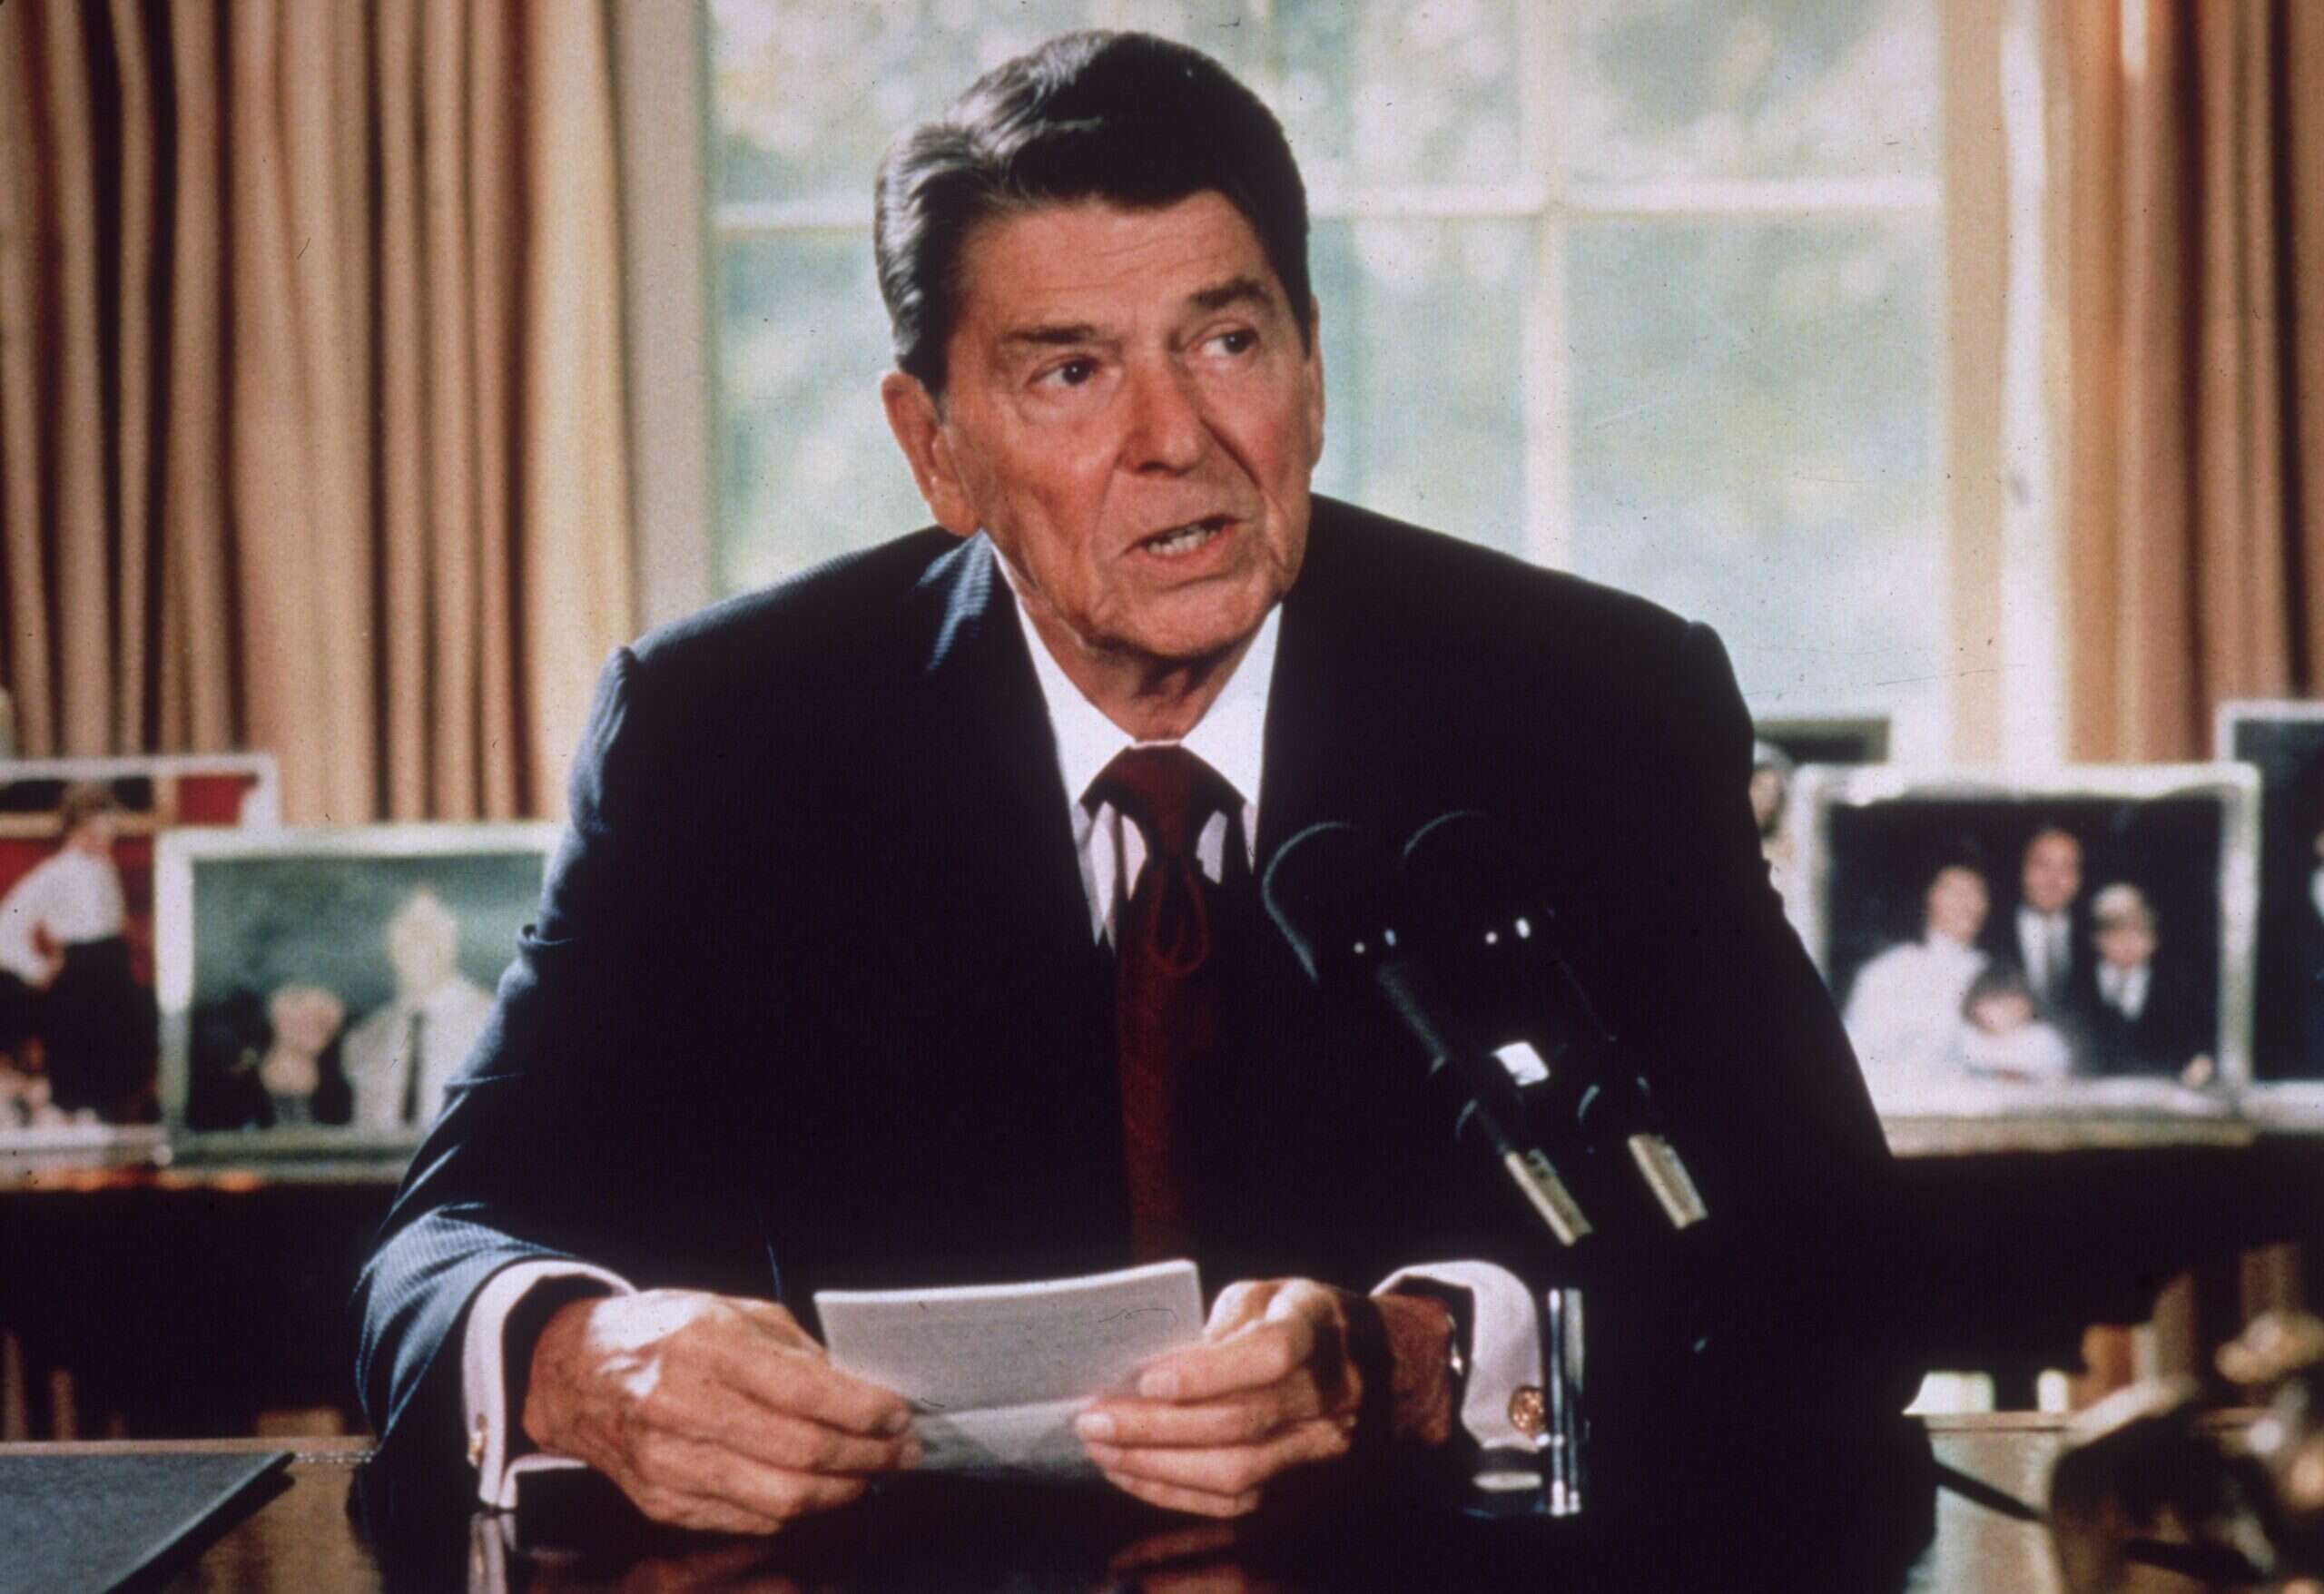 From the NS archive: Make no mistake – this is Reagan’s foreign policy